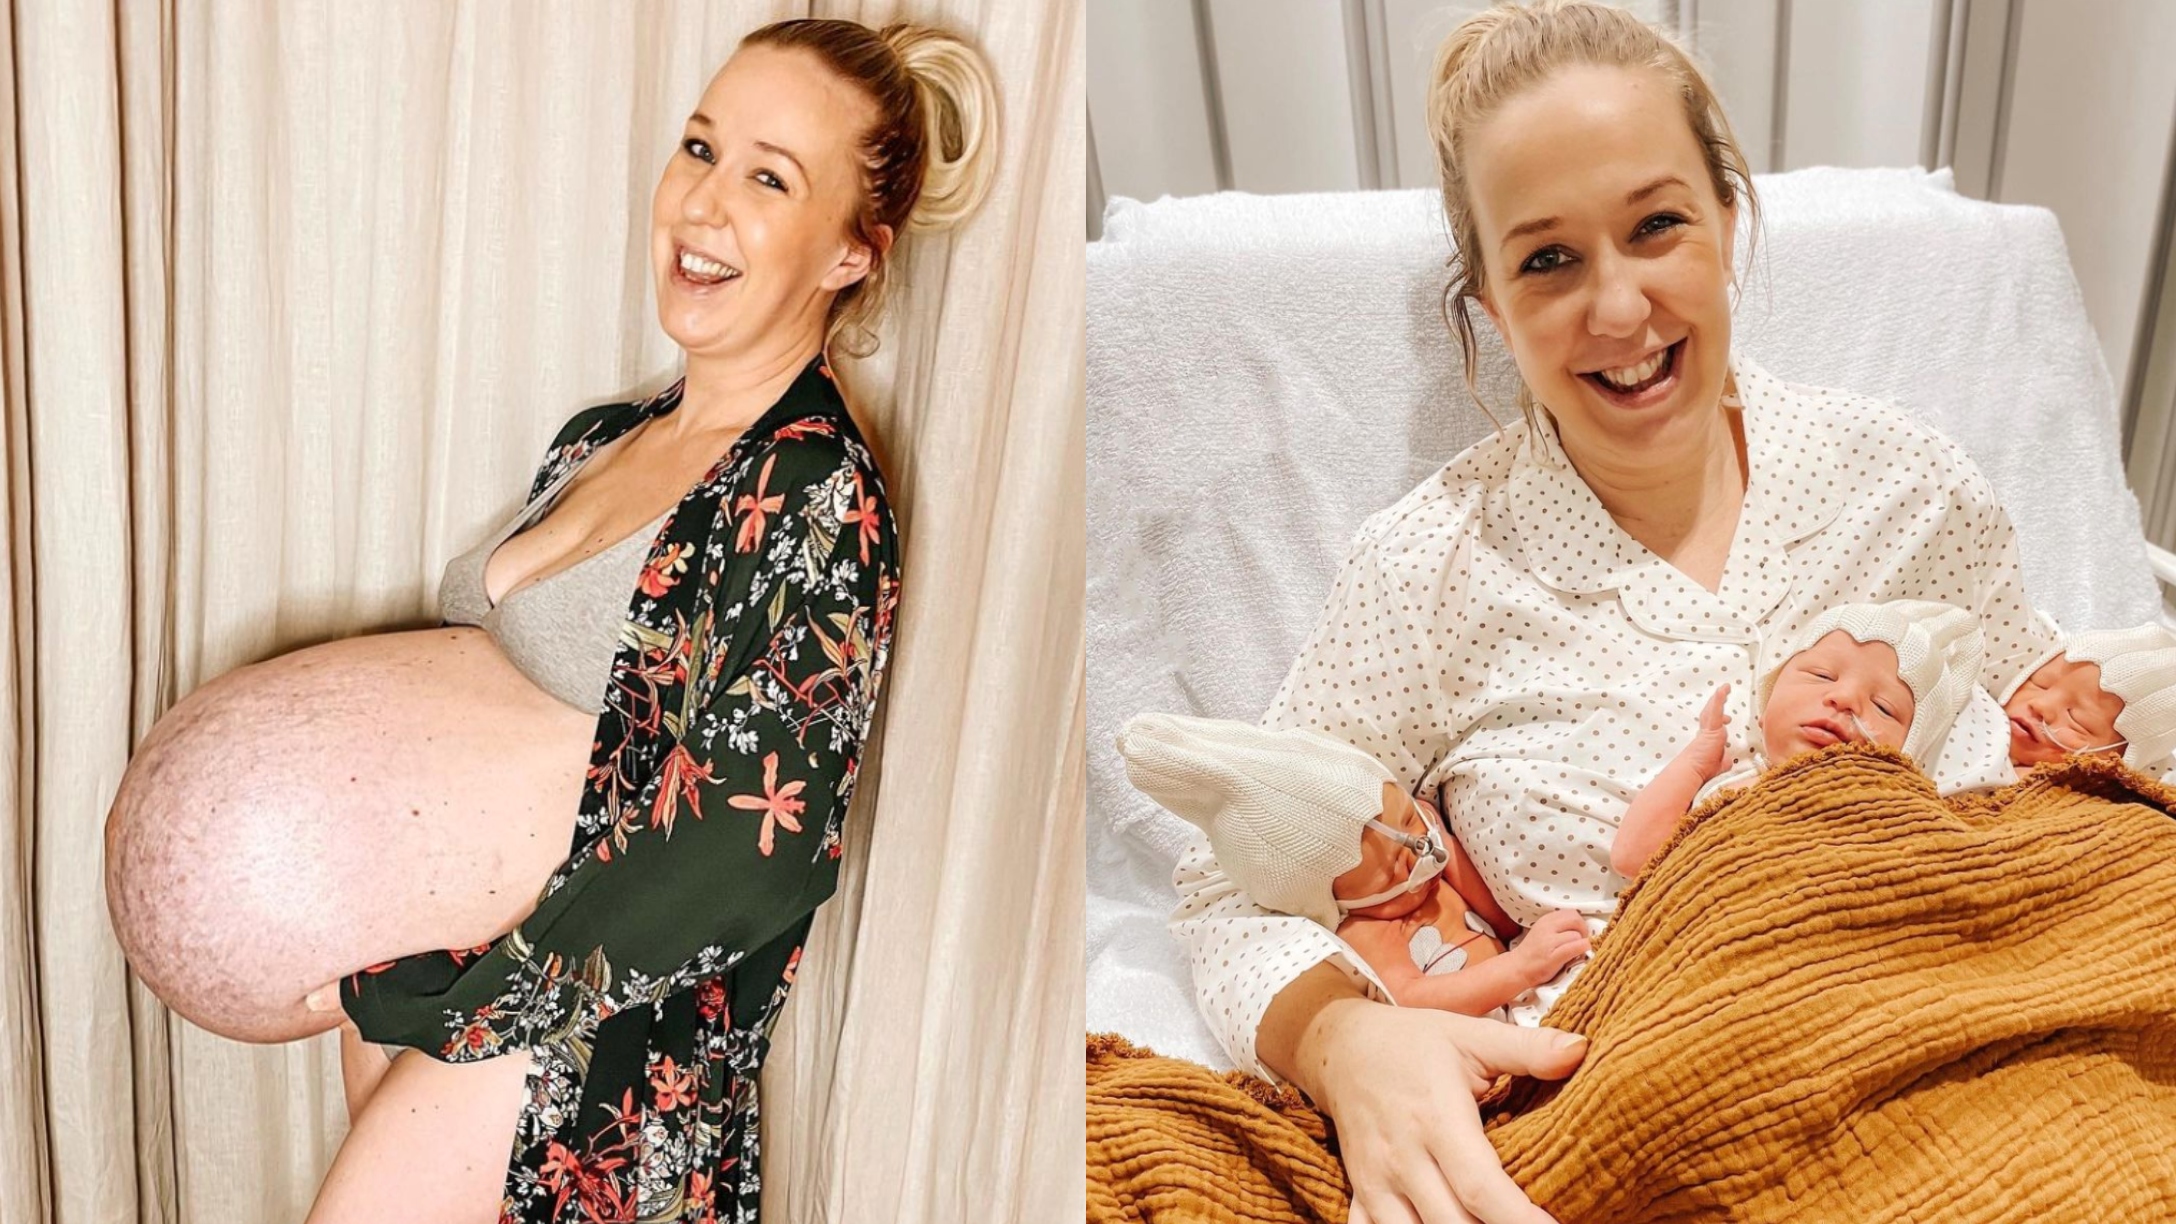 Before & after photos show the reality of a multiples pregnancy